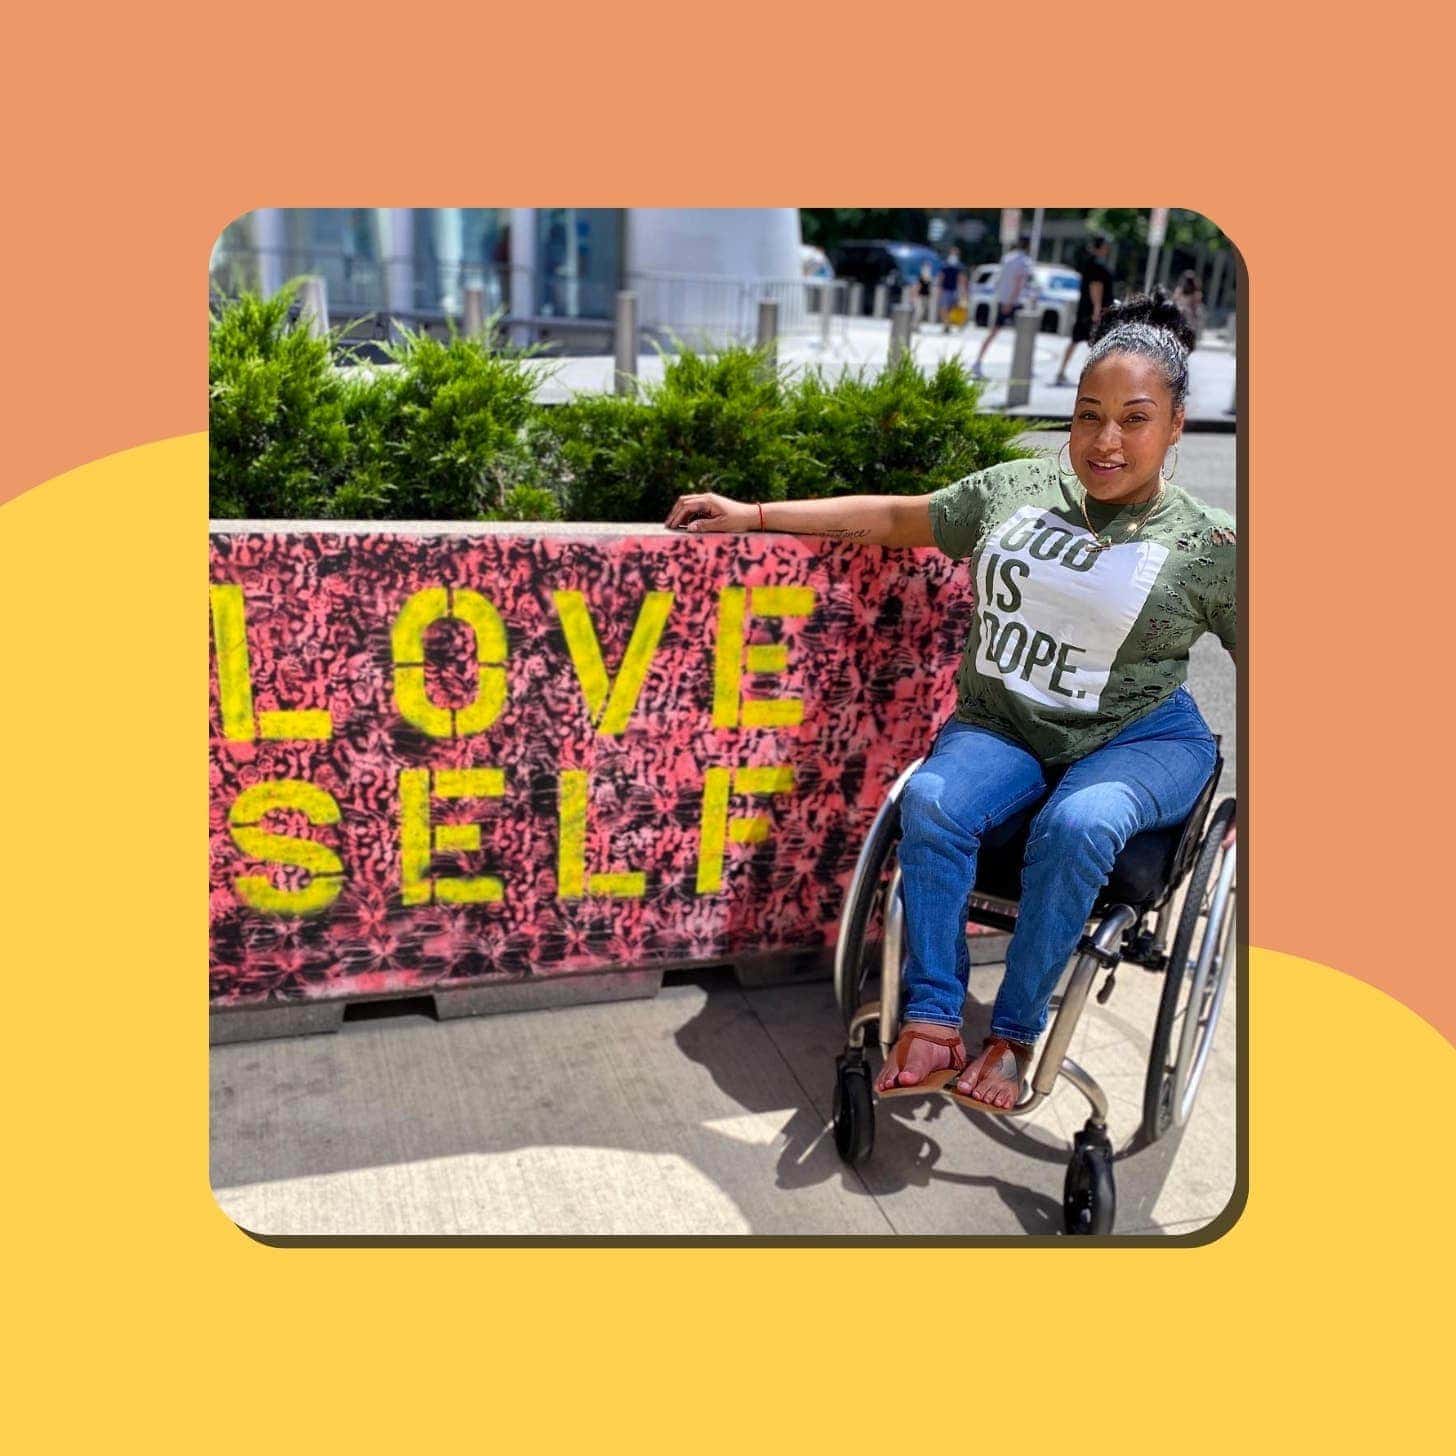 A Black woman wearing a shirt that says God Is Dope sits in a wheelchair next to a sign that says Love Self